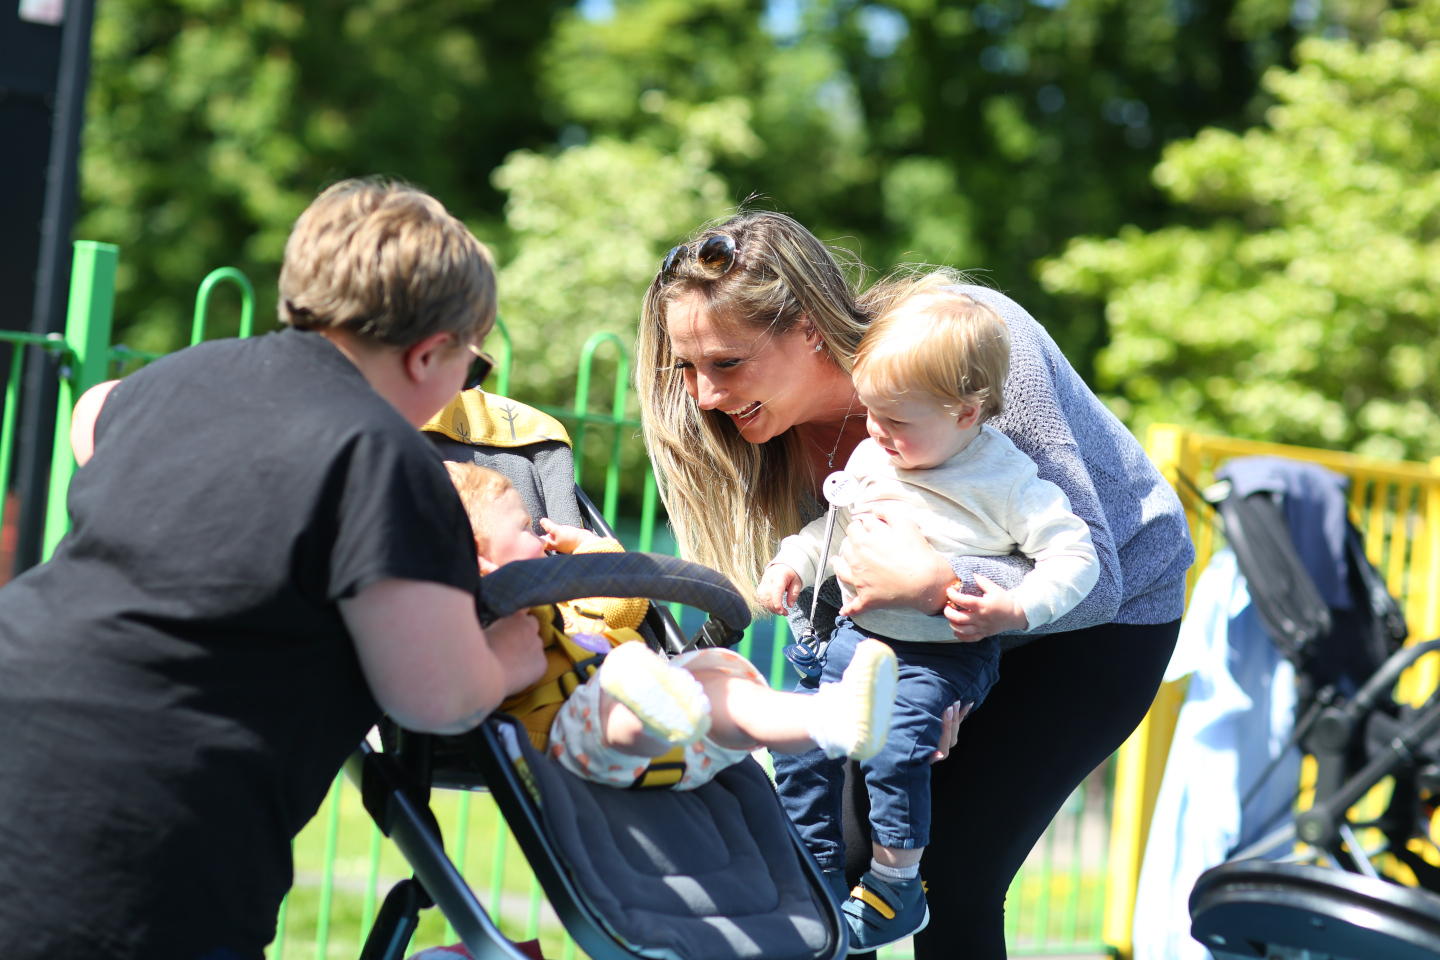 Child and foster parents in the park